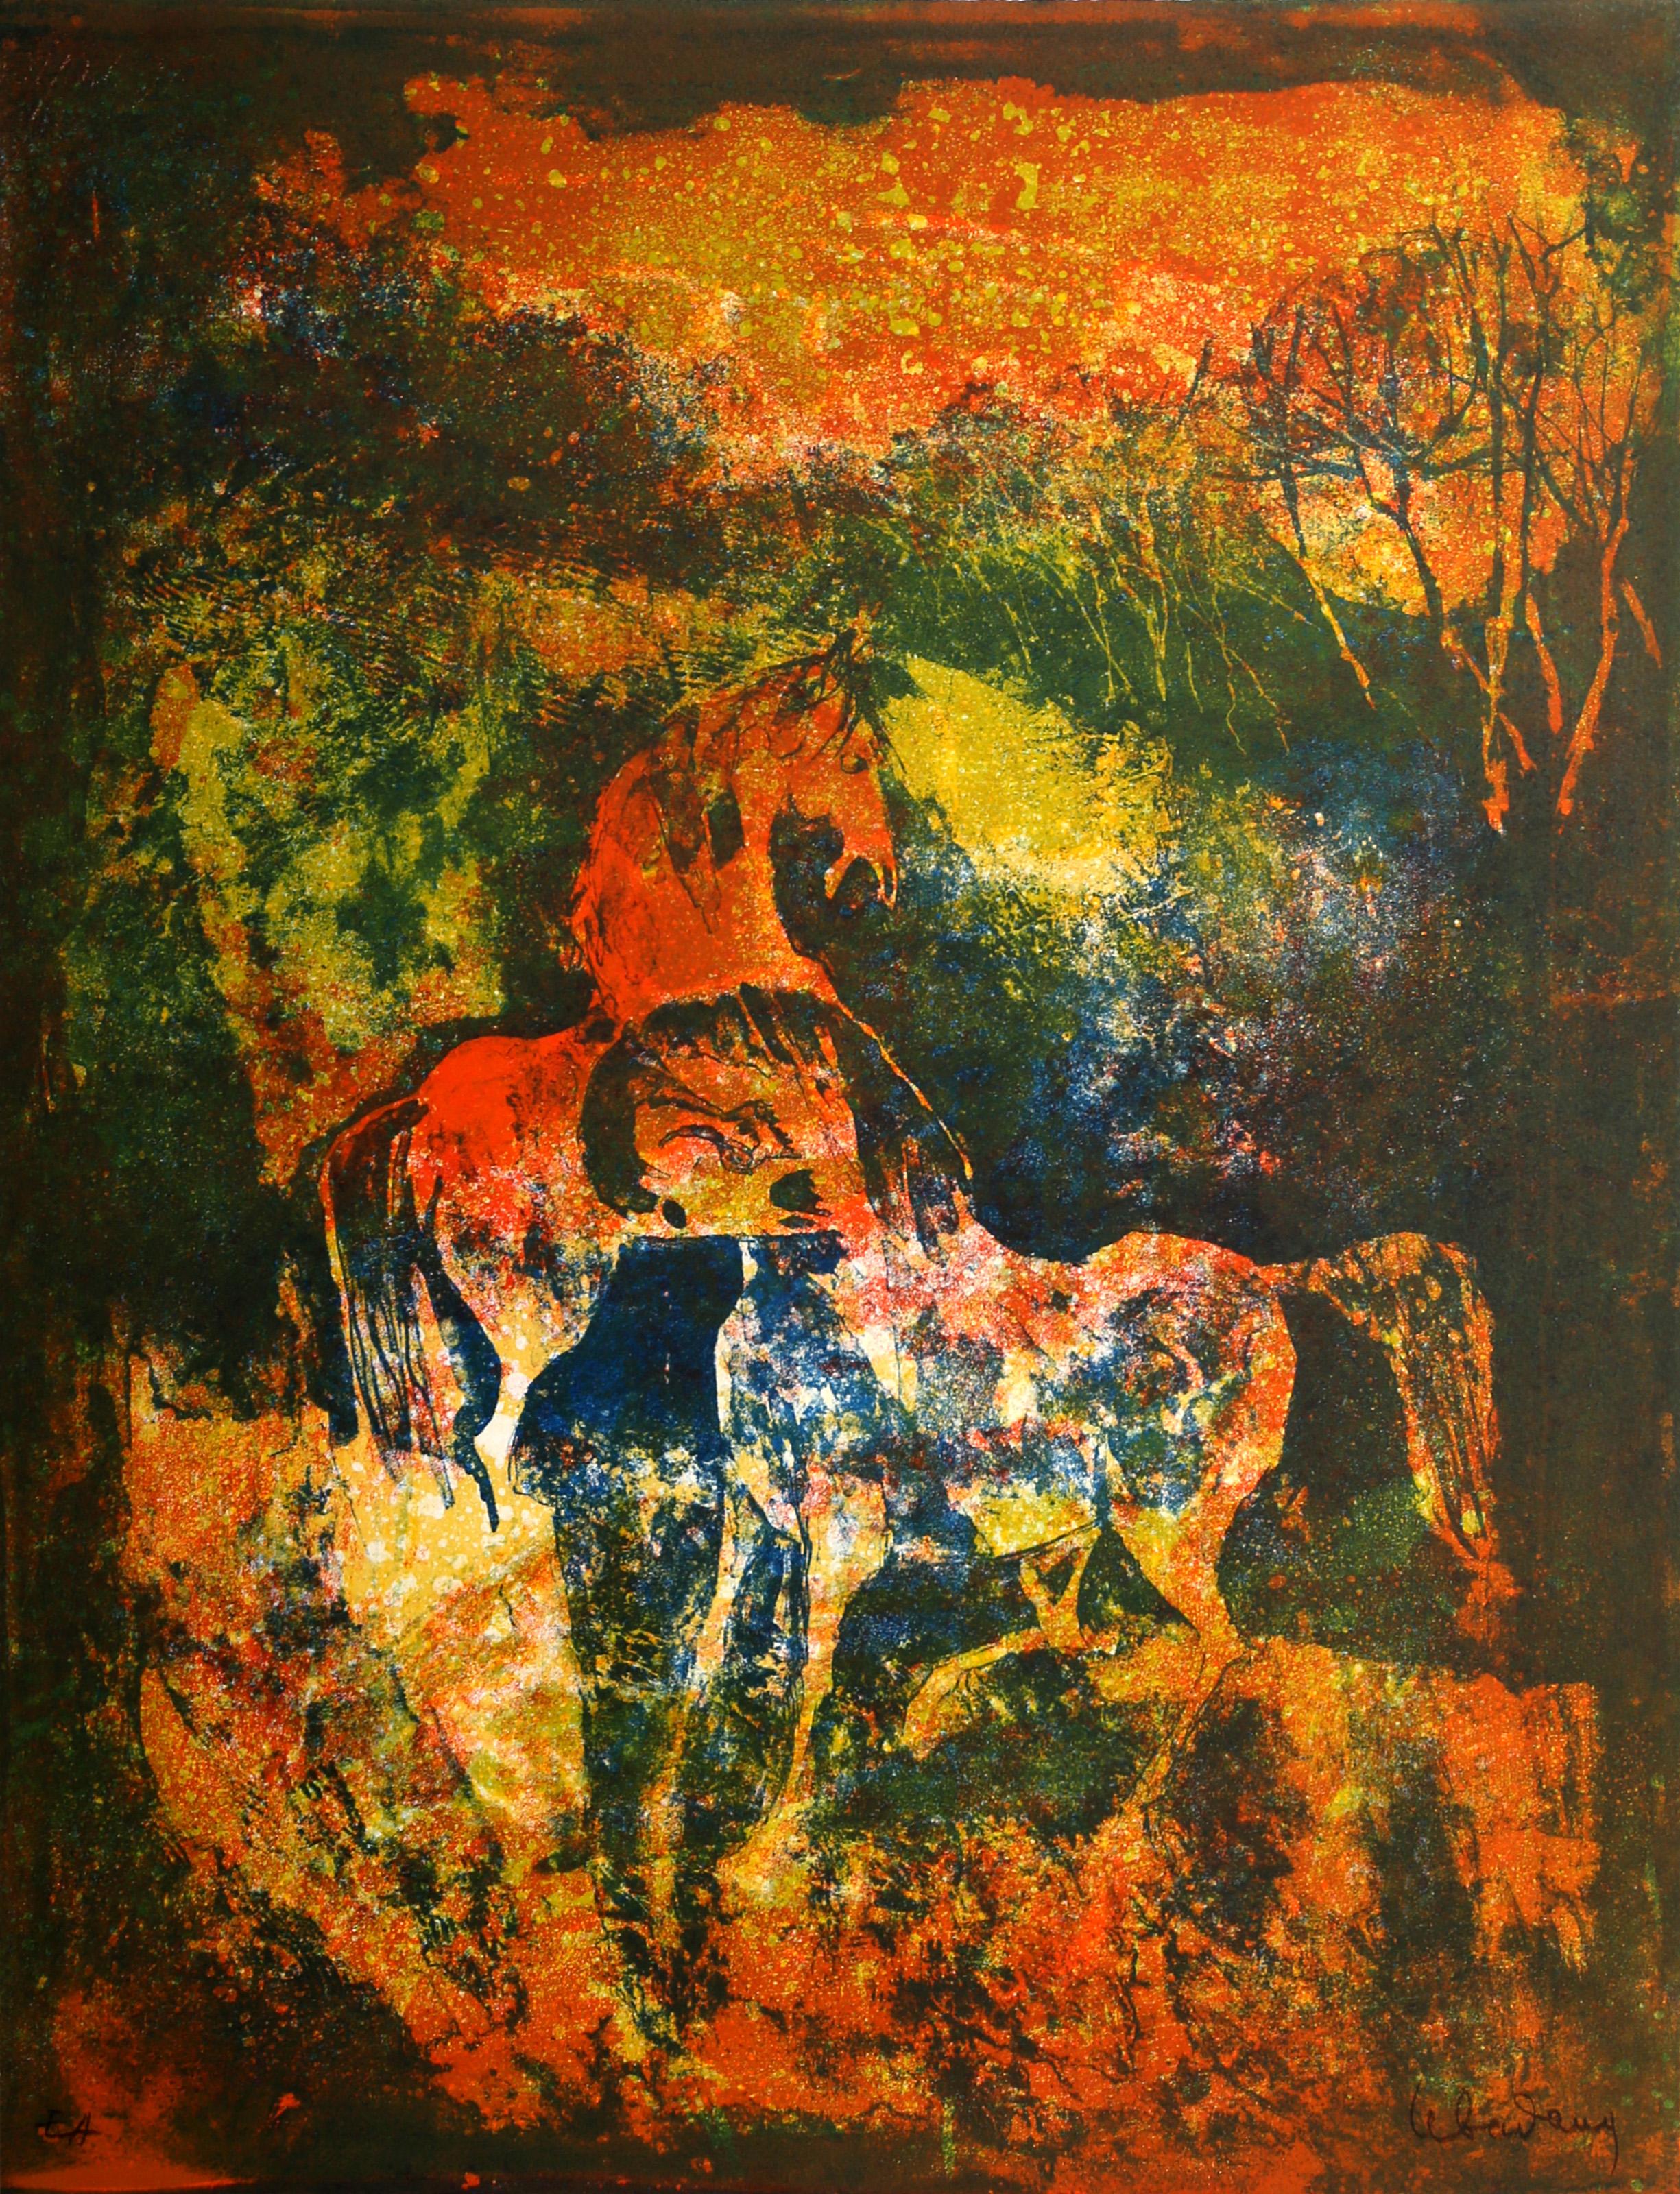 Lebadang (aka Hoi), Vietnamese (1922 - 2015) -  Battle Between Horses 3. Medium: Lithograph, signed and numbered in pencil, Edition: E.A., Size: 25.5 x 19.5 in. (64.77 x 49.53 cm), Description: Lebadang was a Vietnam-born French artist whose work